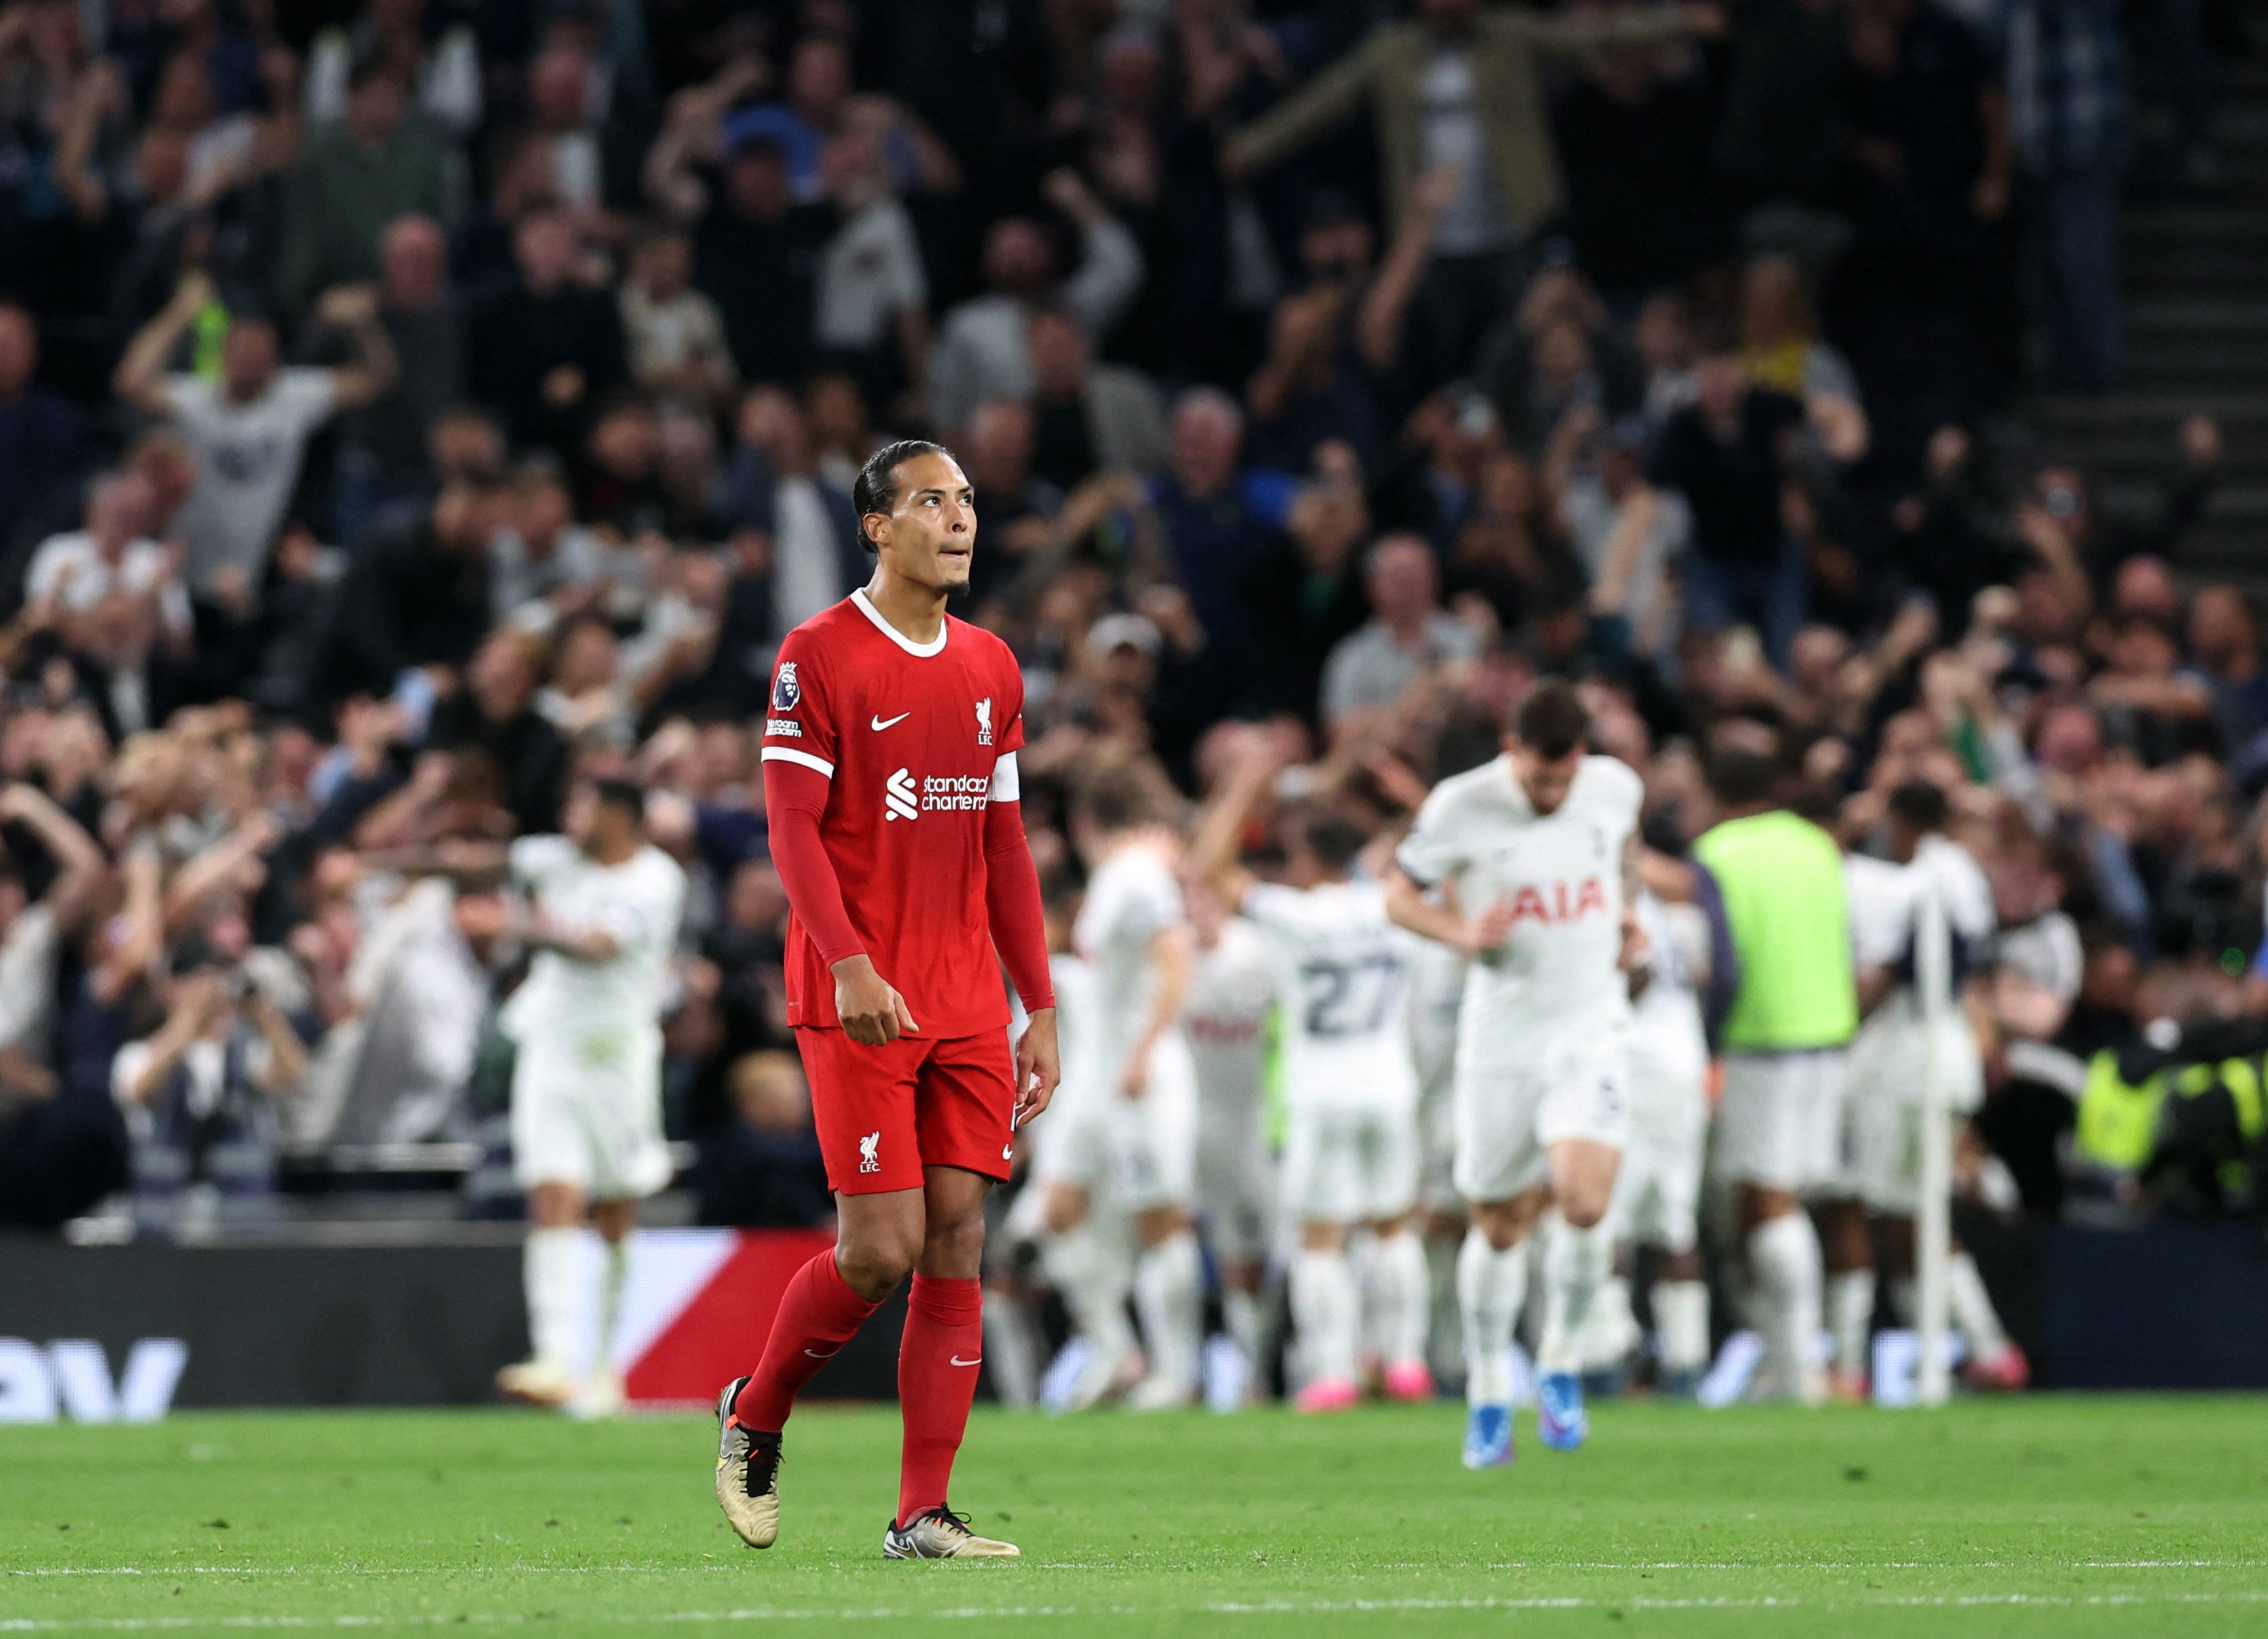 Tottenham take their moment of fortune as Liverpool are left with